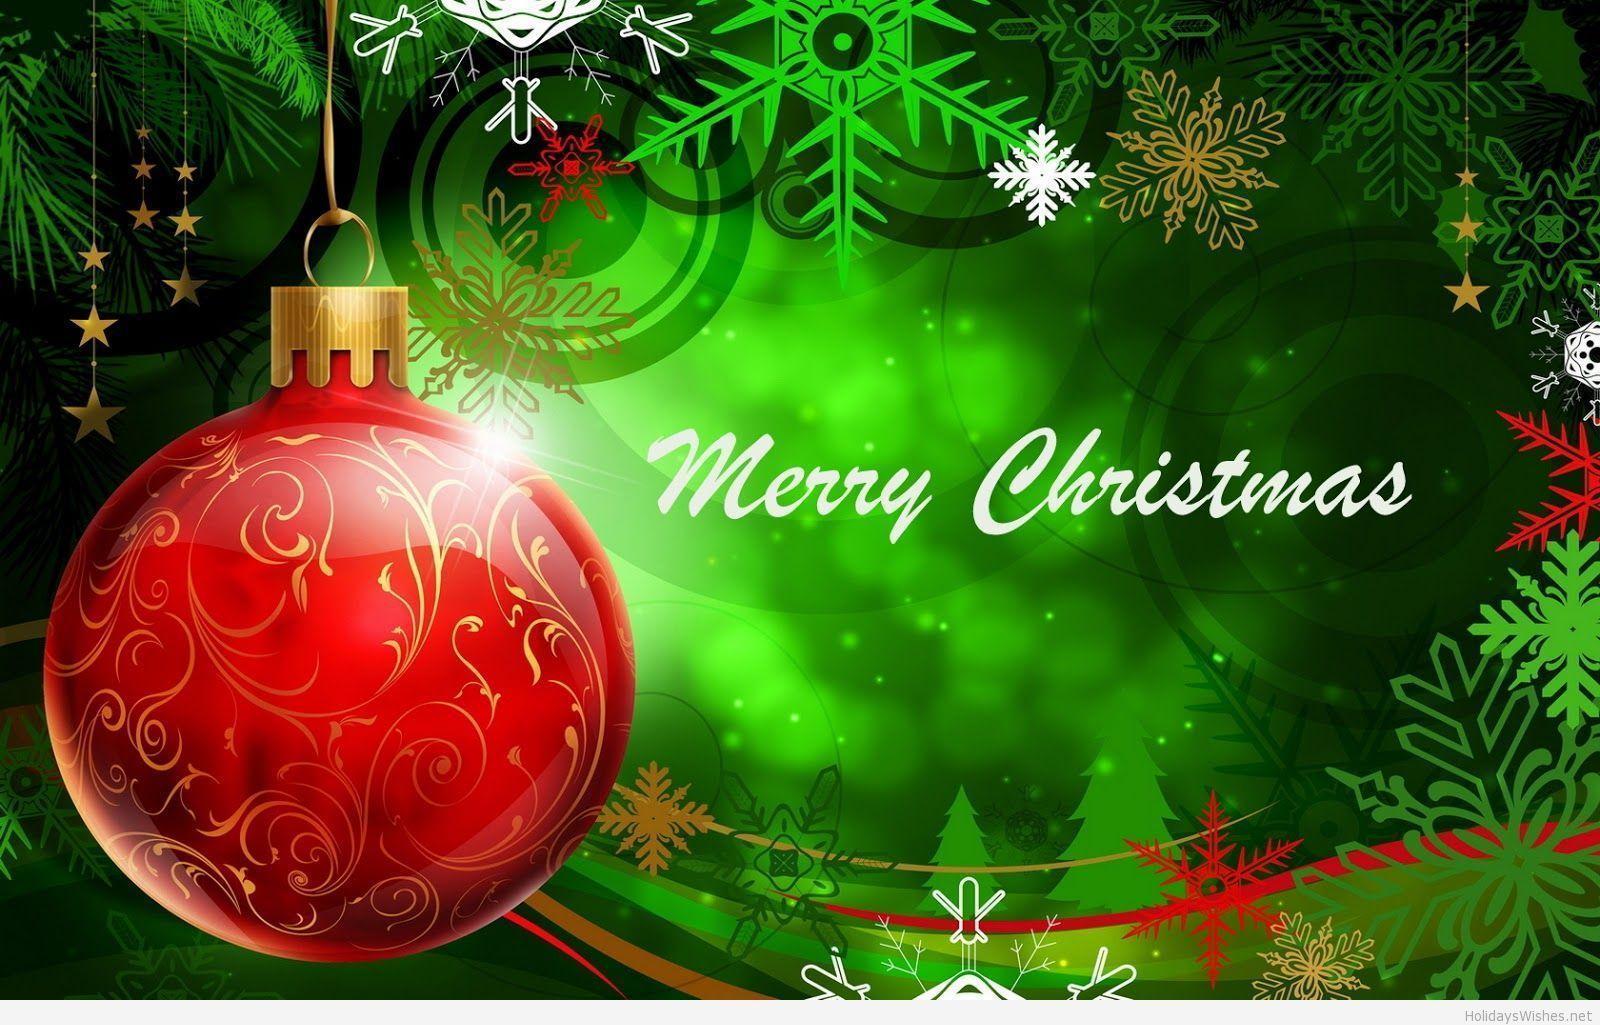 Laptop Merry Christmas Wallpapers Wallpaper Cave 0369